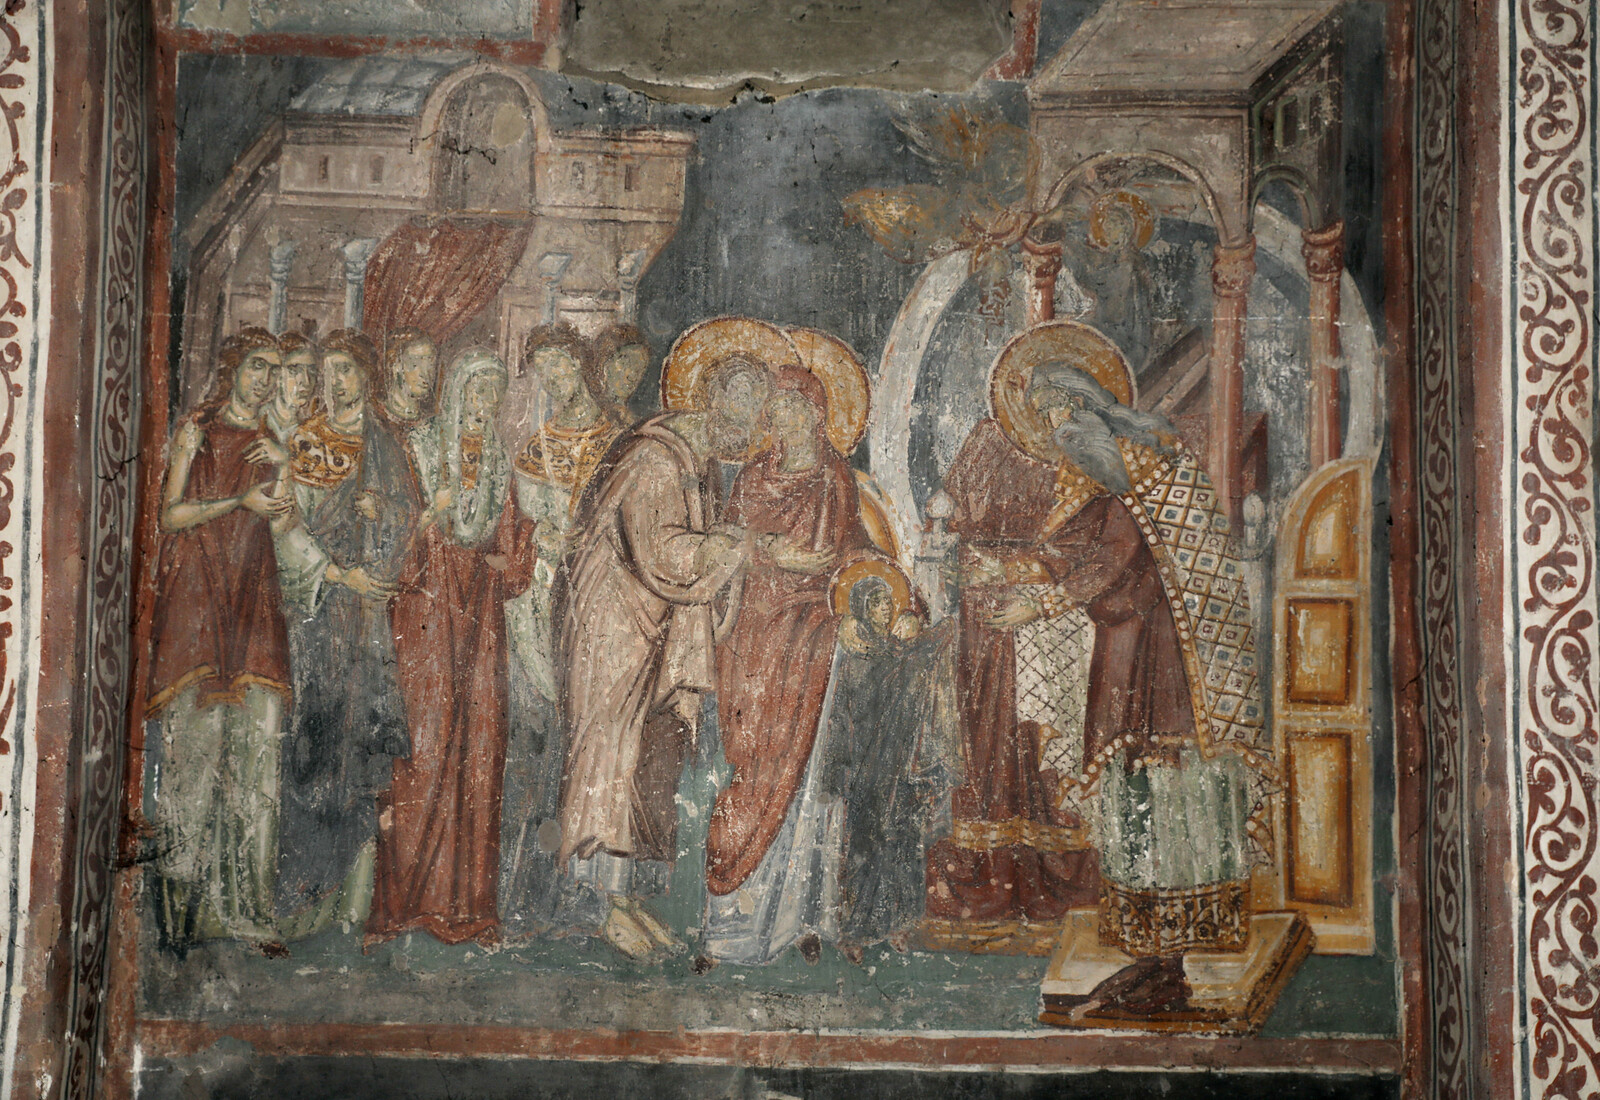 Presentation of the Virgin in the Temple